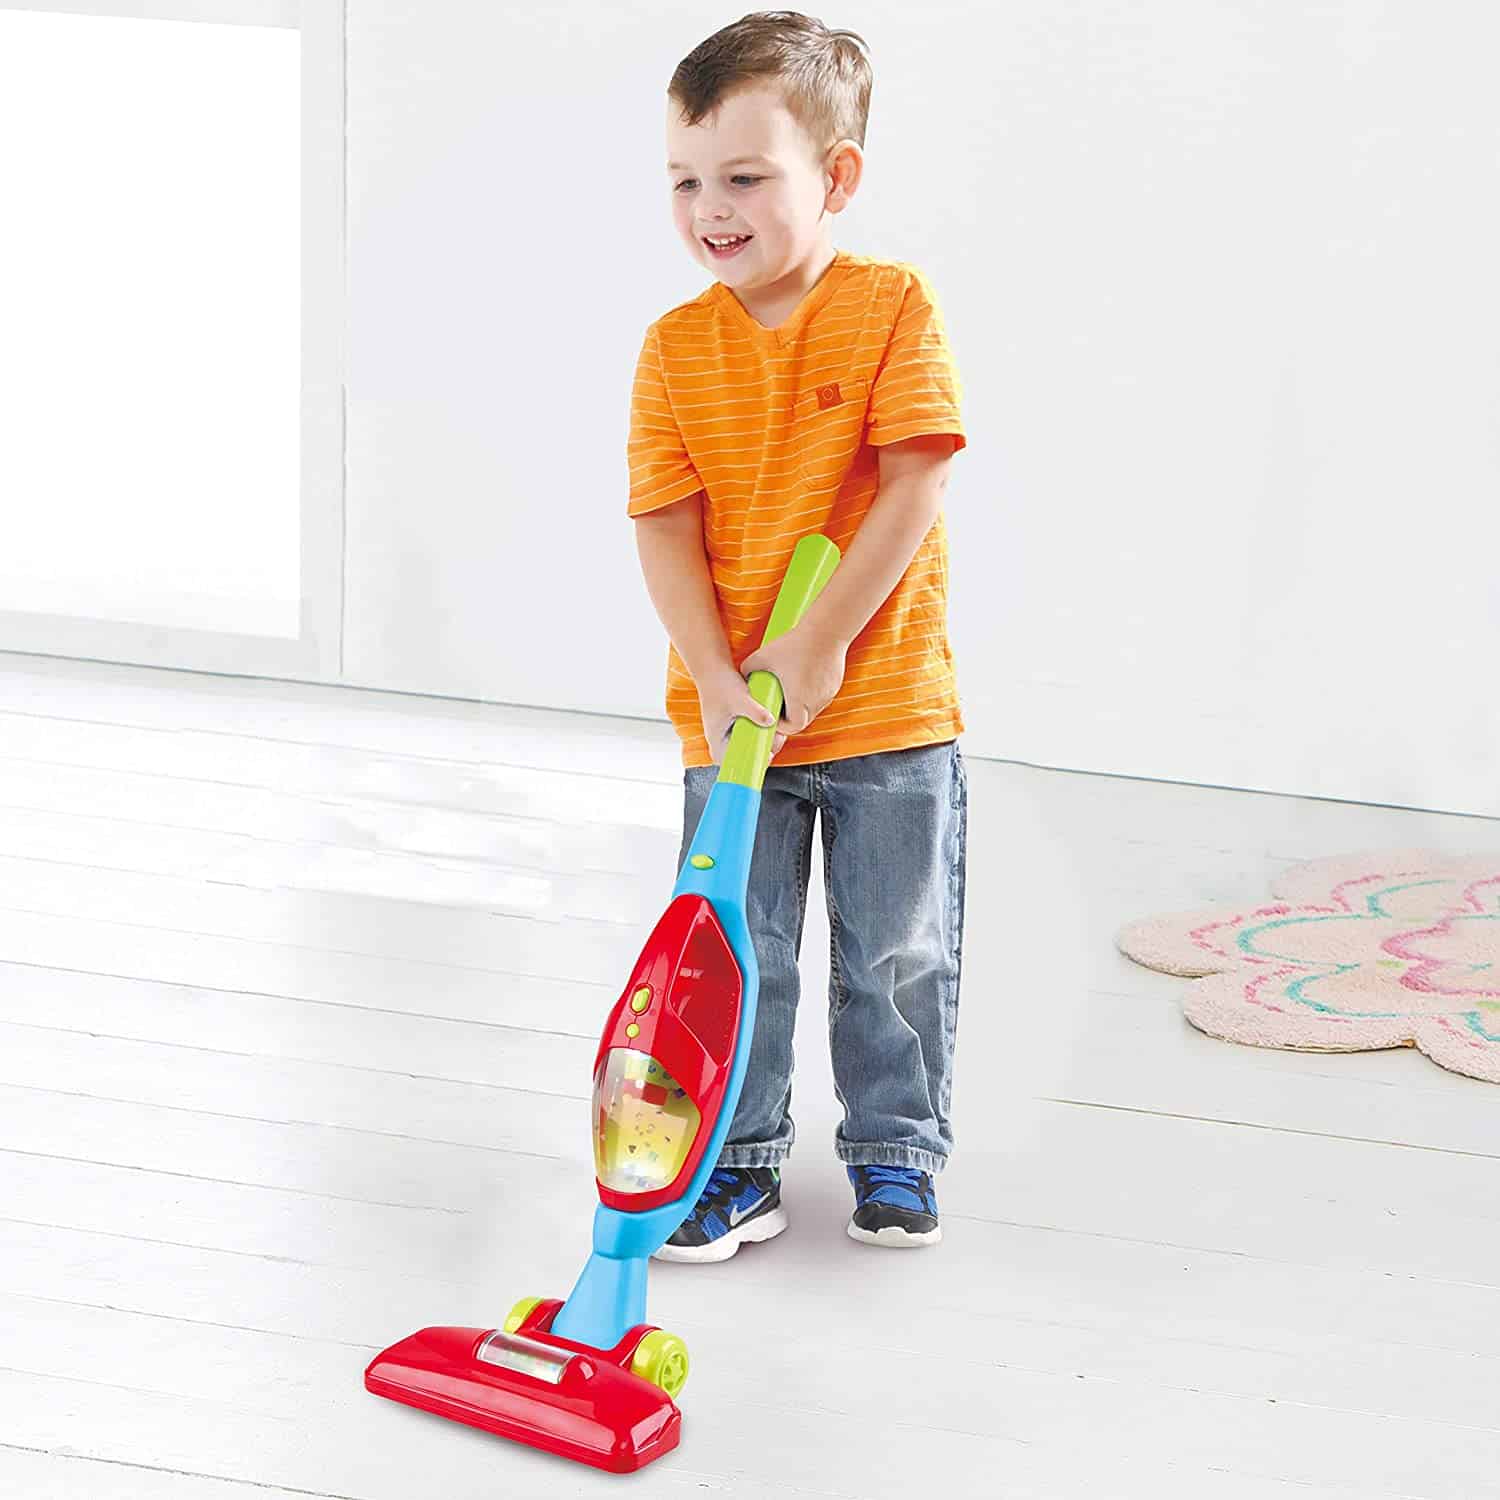 Best toy vacuum cleaner for toddlers: Playgo 2-in-1